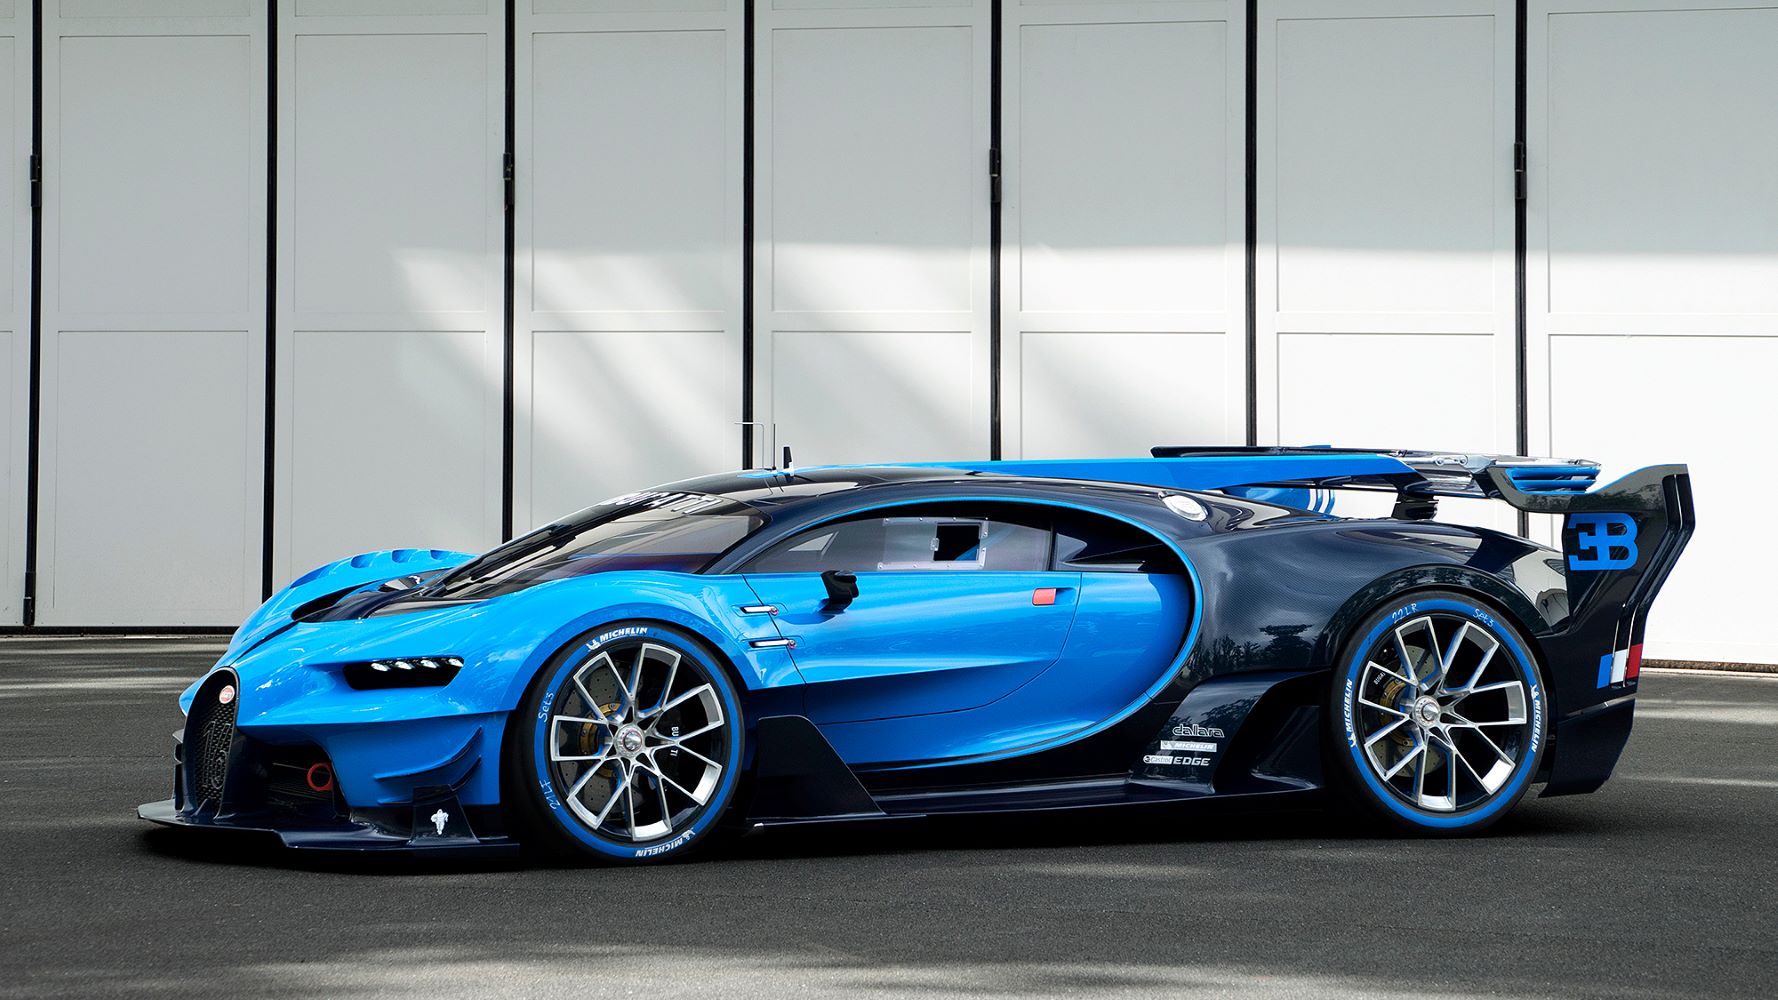 How Much Is Insurance For A Bugatti?